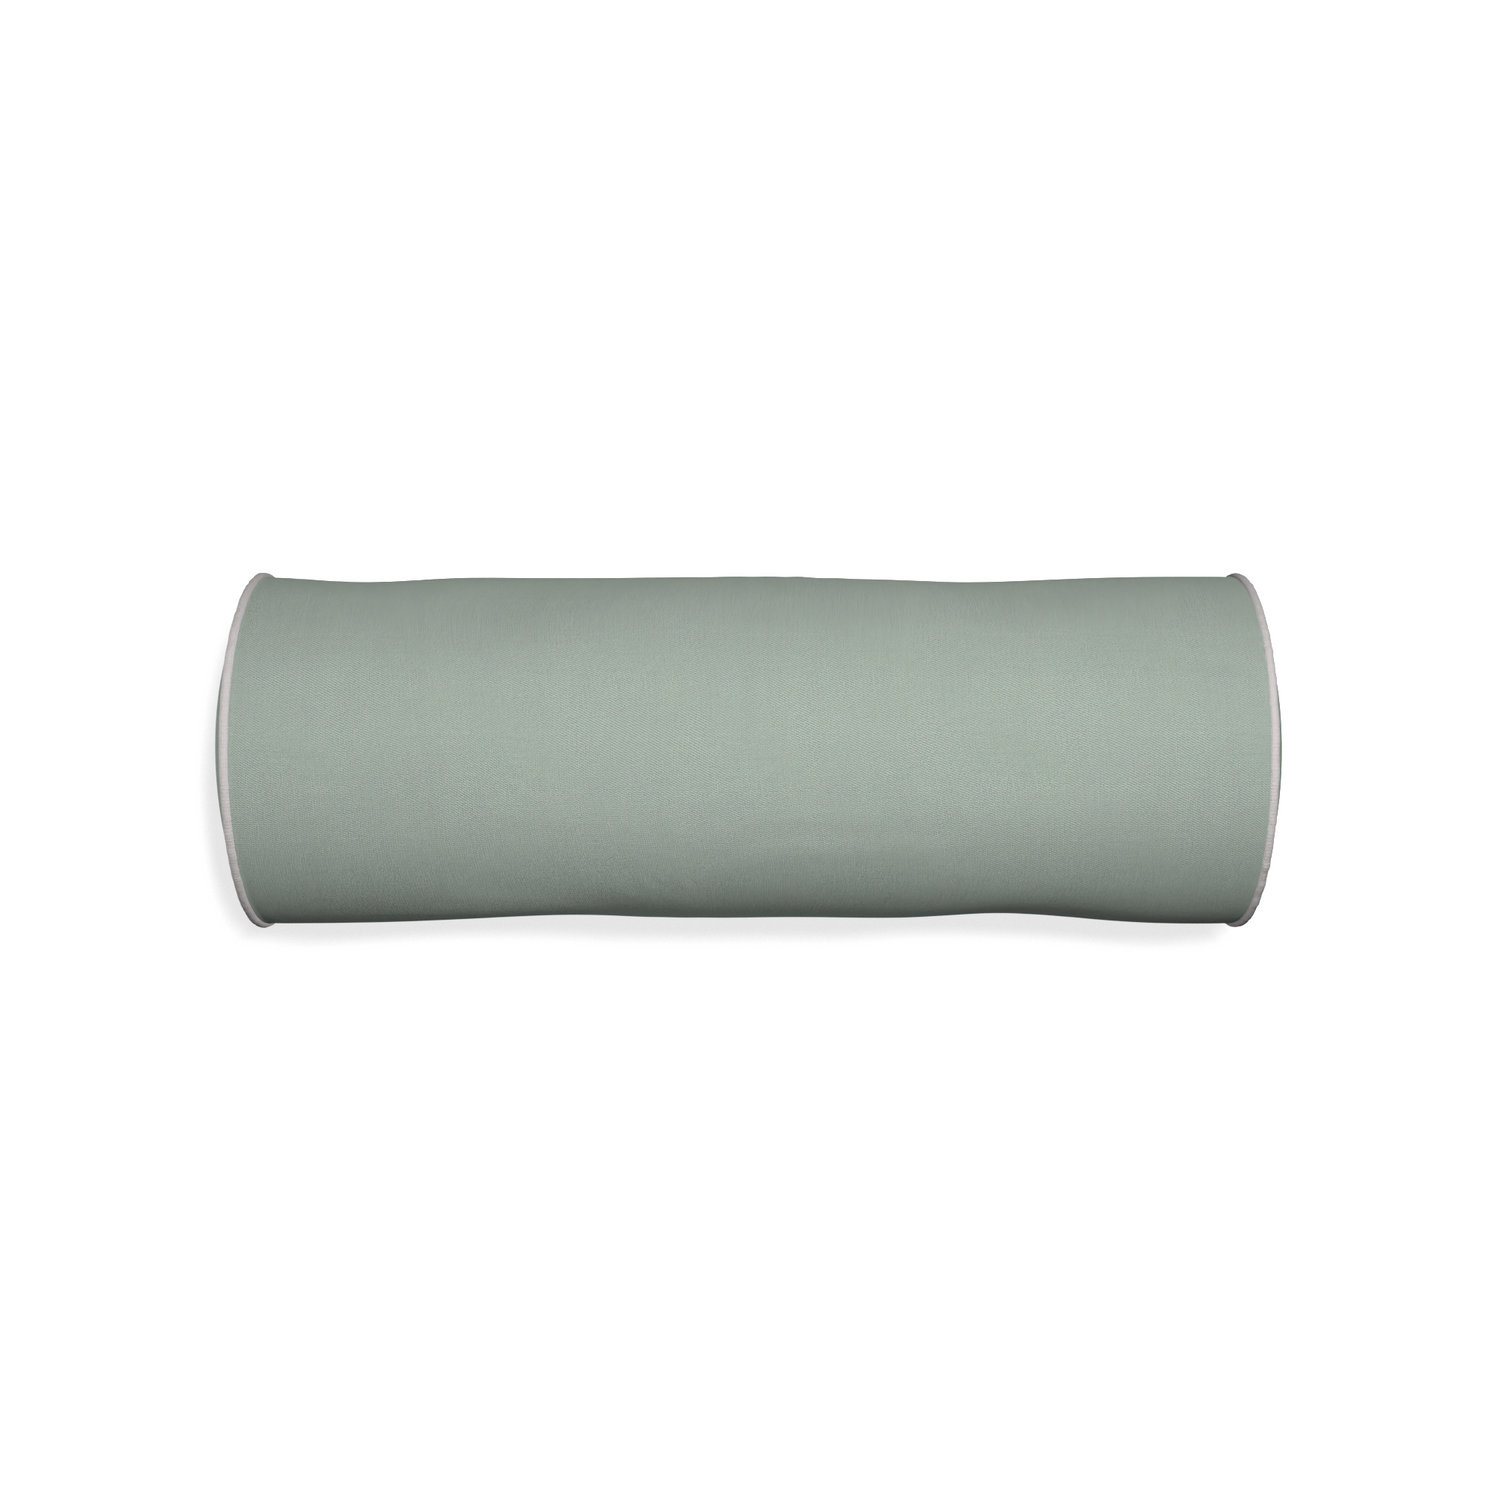 Bolster sage custom sage green cottonpillow with pebble piping on white background